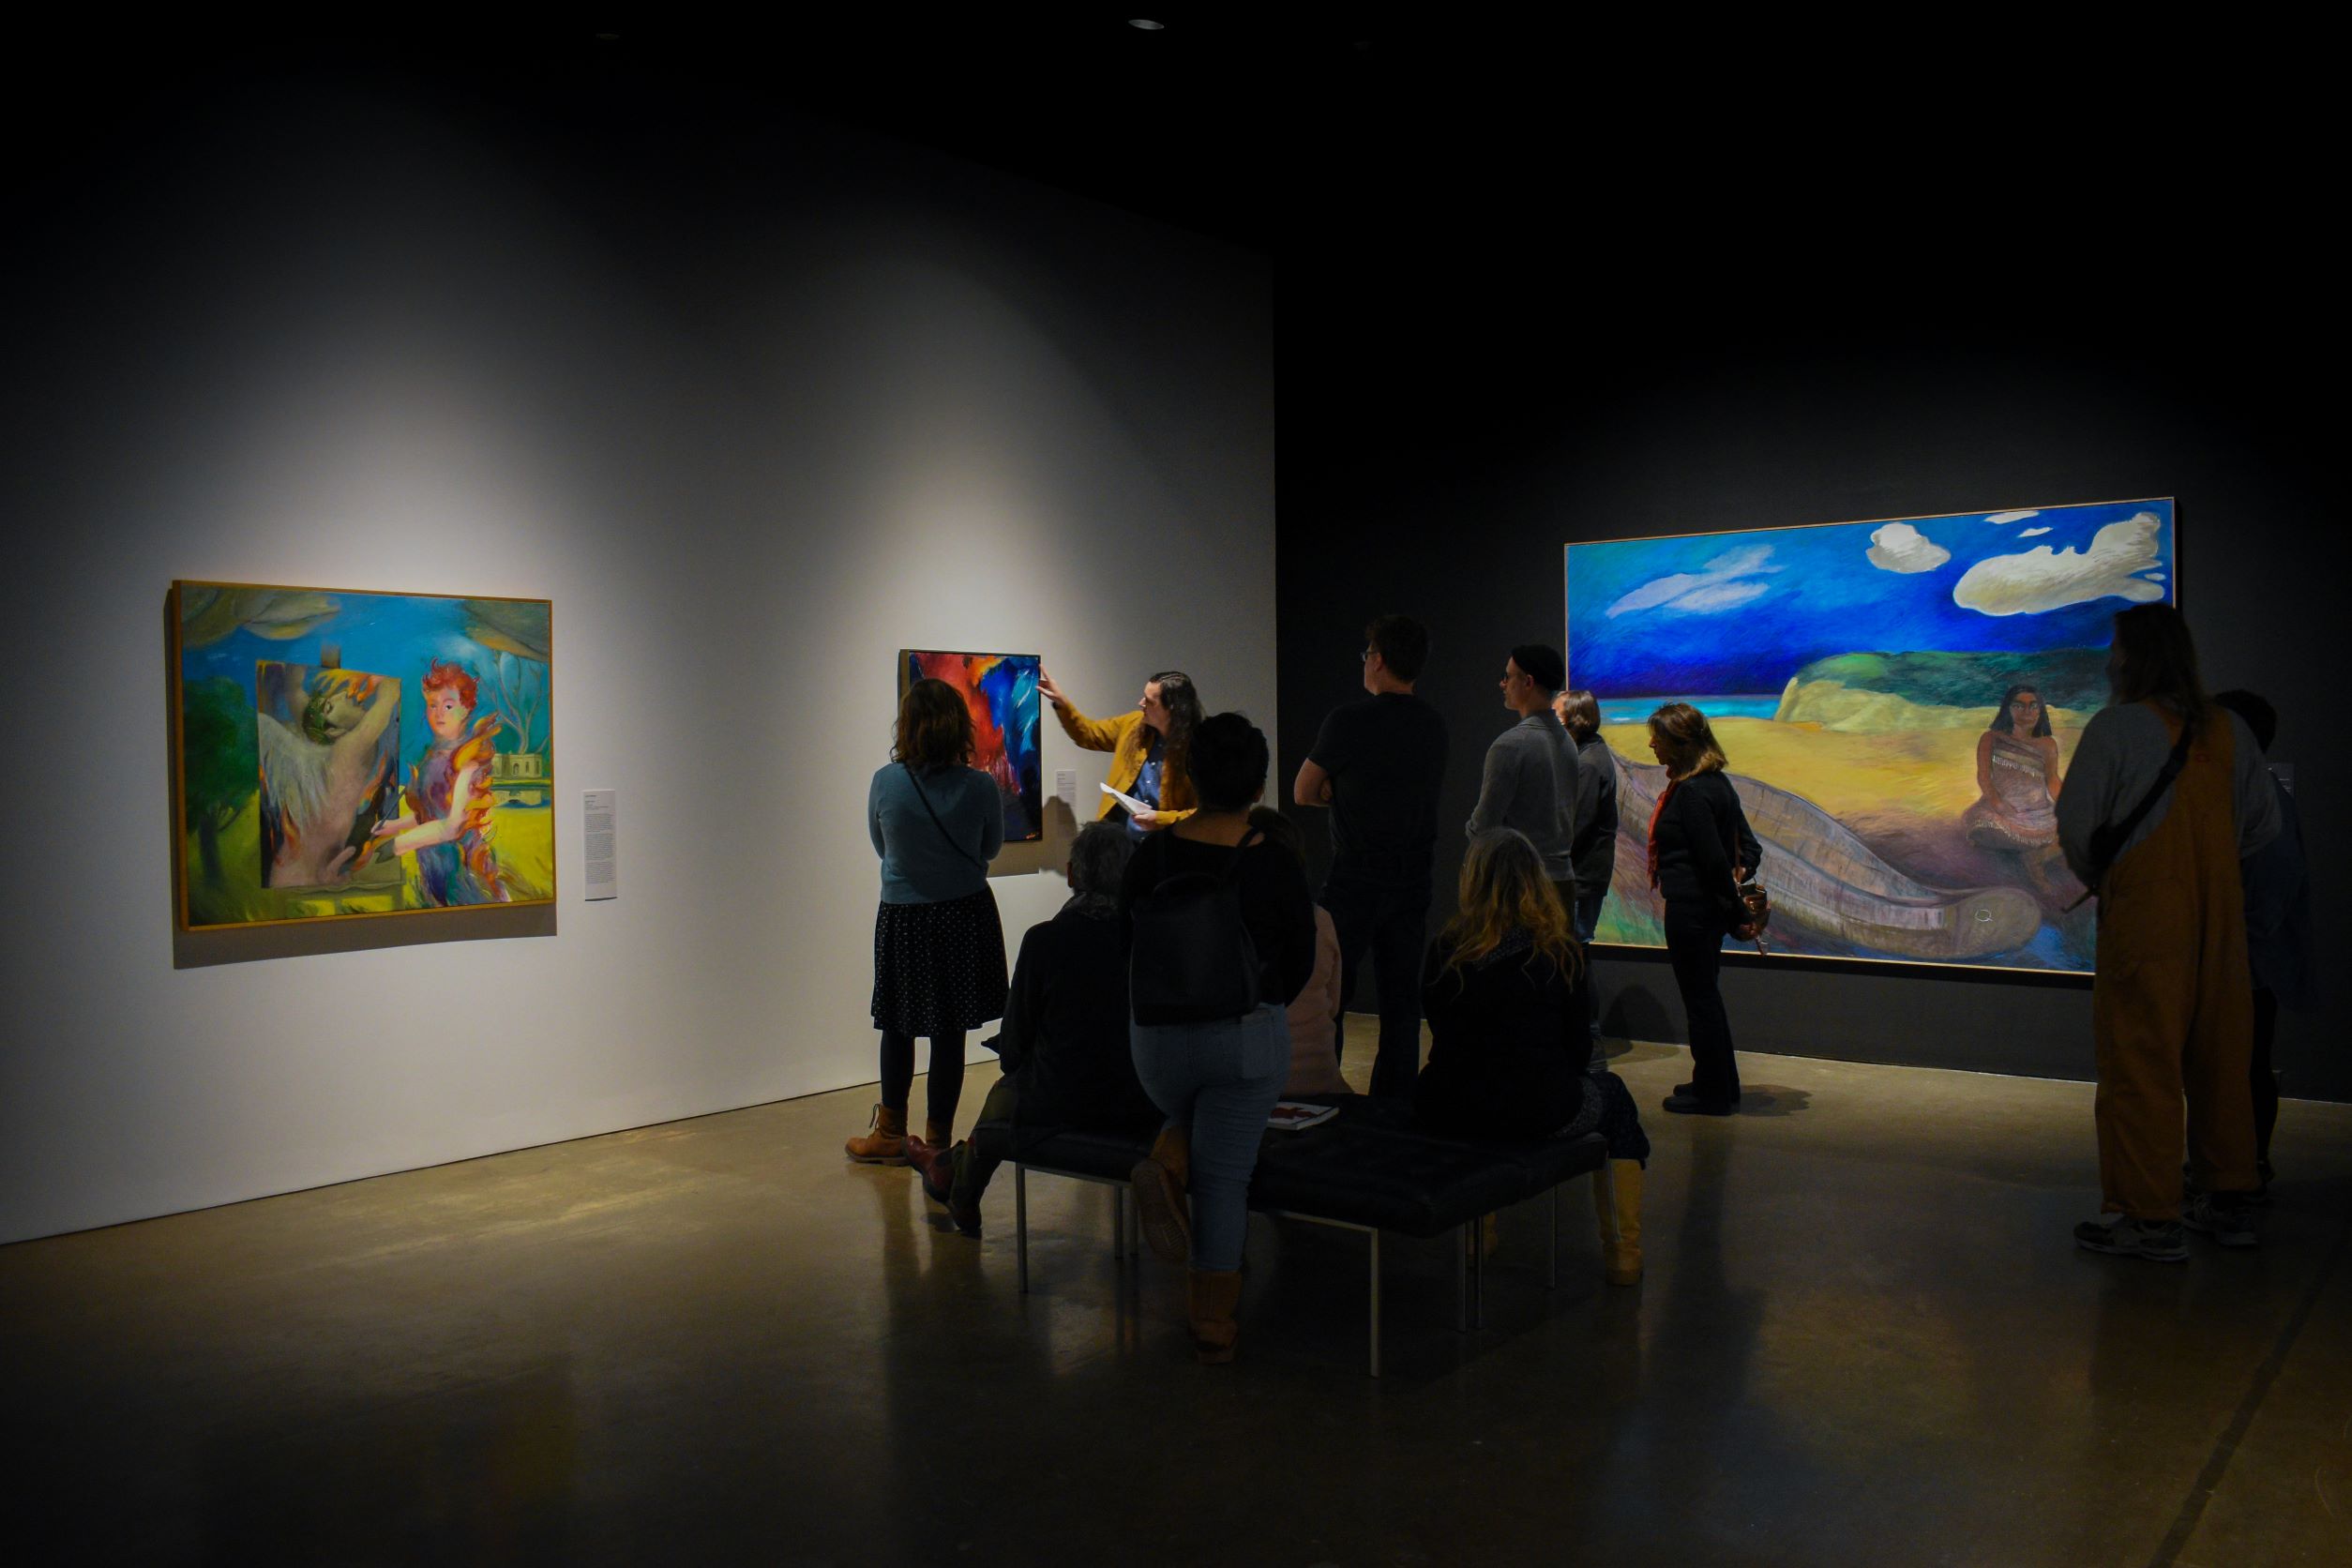 A group of people standing in a dimly lit room looking at painting on a gallery wall.